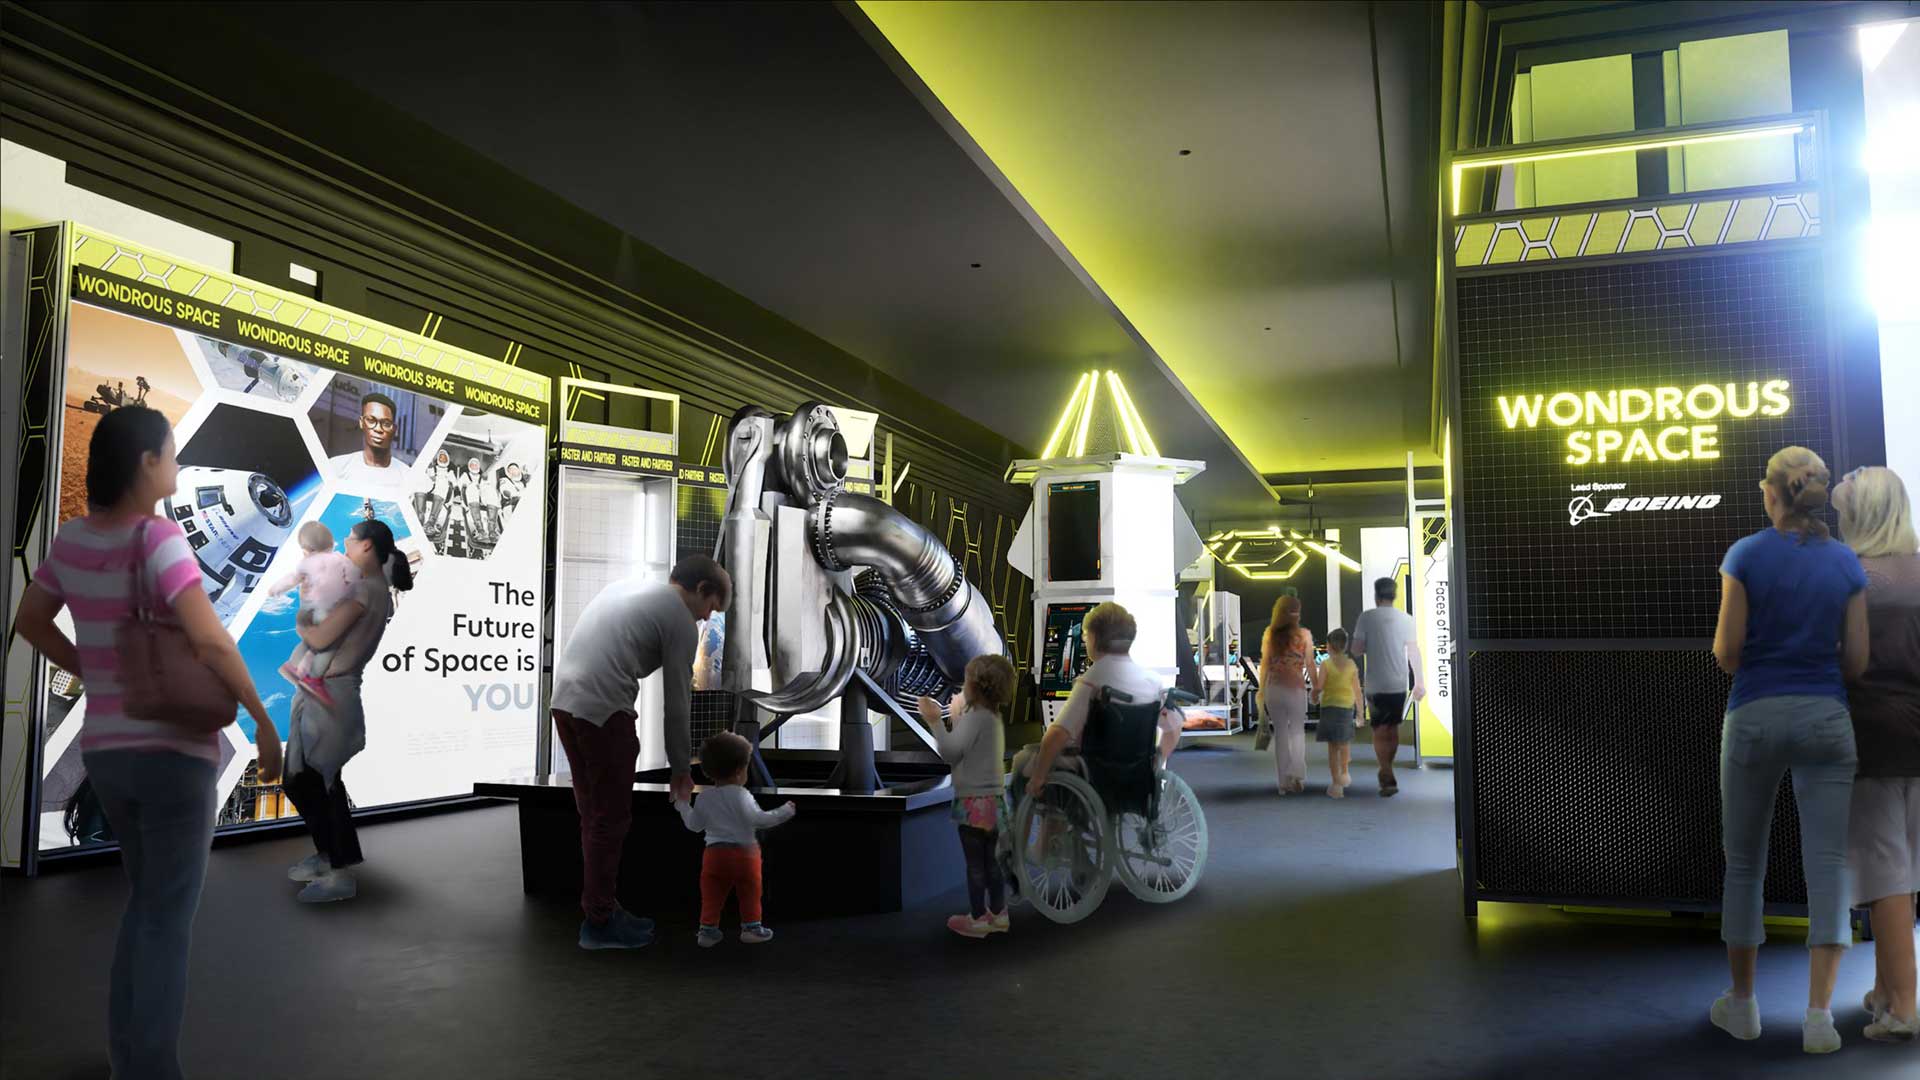 A rendering of the new Wondrous Space exhibit. Rendering created by MSDX.